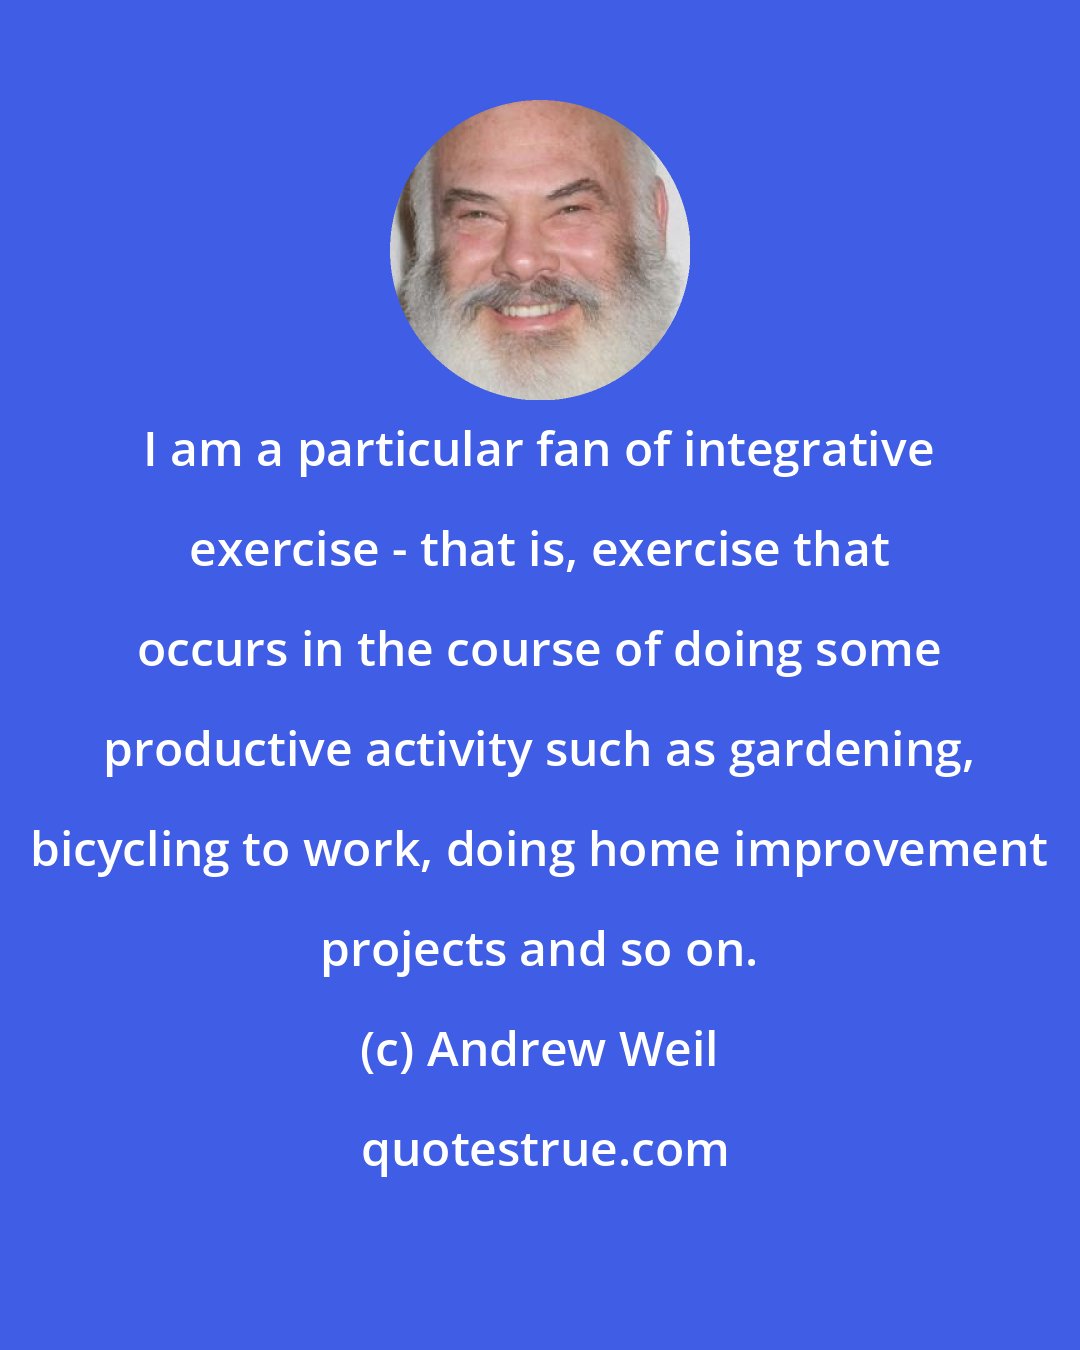 Andrew Weil: I am a particular fan of integrative exercise - that is, exercise that occurs in the course of doing some productive activity such as gardening, bicycling to work, doing home improvement projects and so on.